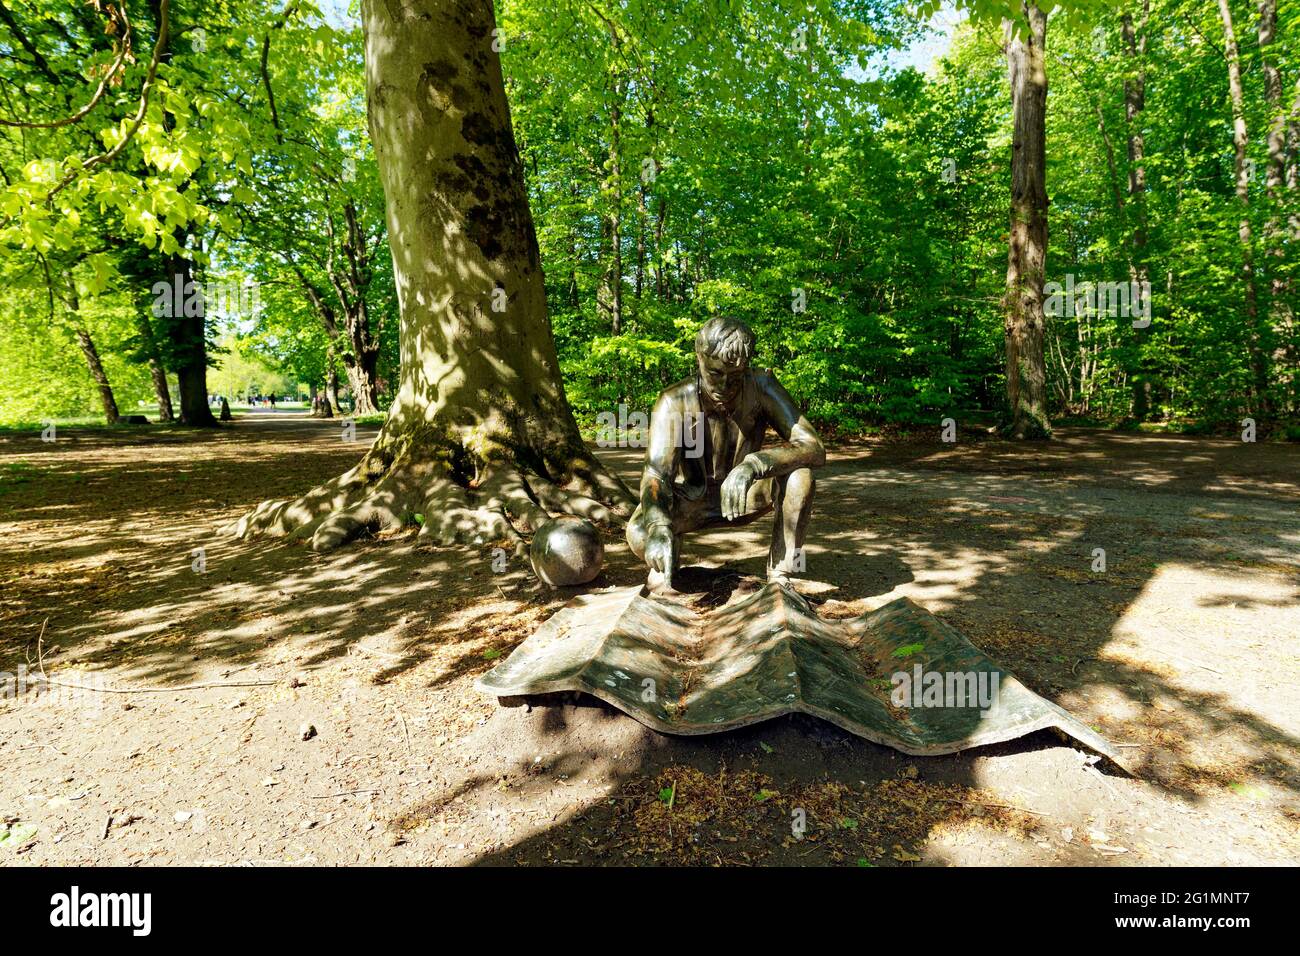 France, Bas Rhin, Strasbourg, La Roberstau district, Pourtales Castle park, the Sculpture Park, Genius Loci (The Spirit of Places) by Giulio Paolini (2001), The figure crouching beside a sphere is scrutinizing a map lying on the ground Stock Photo